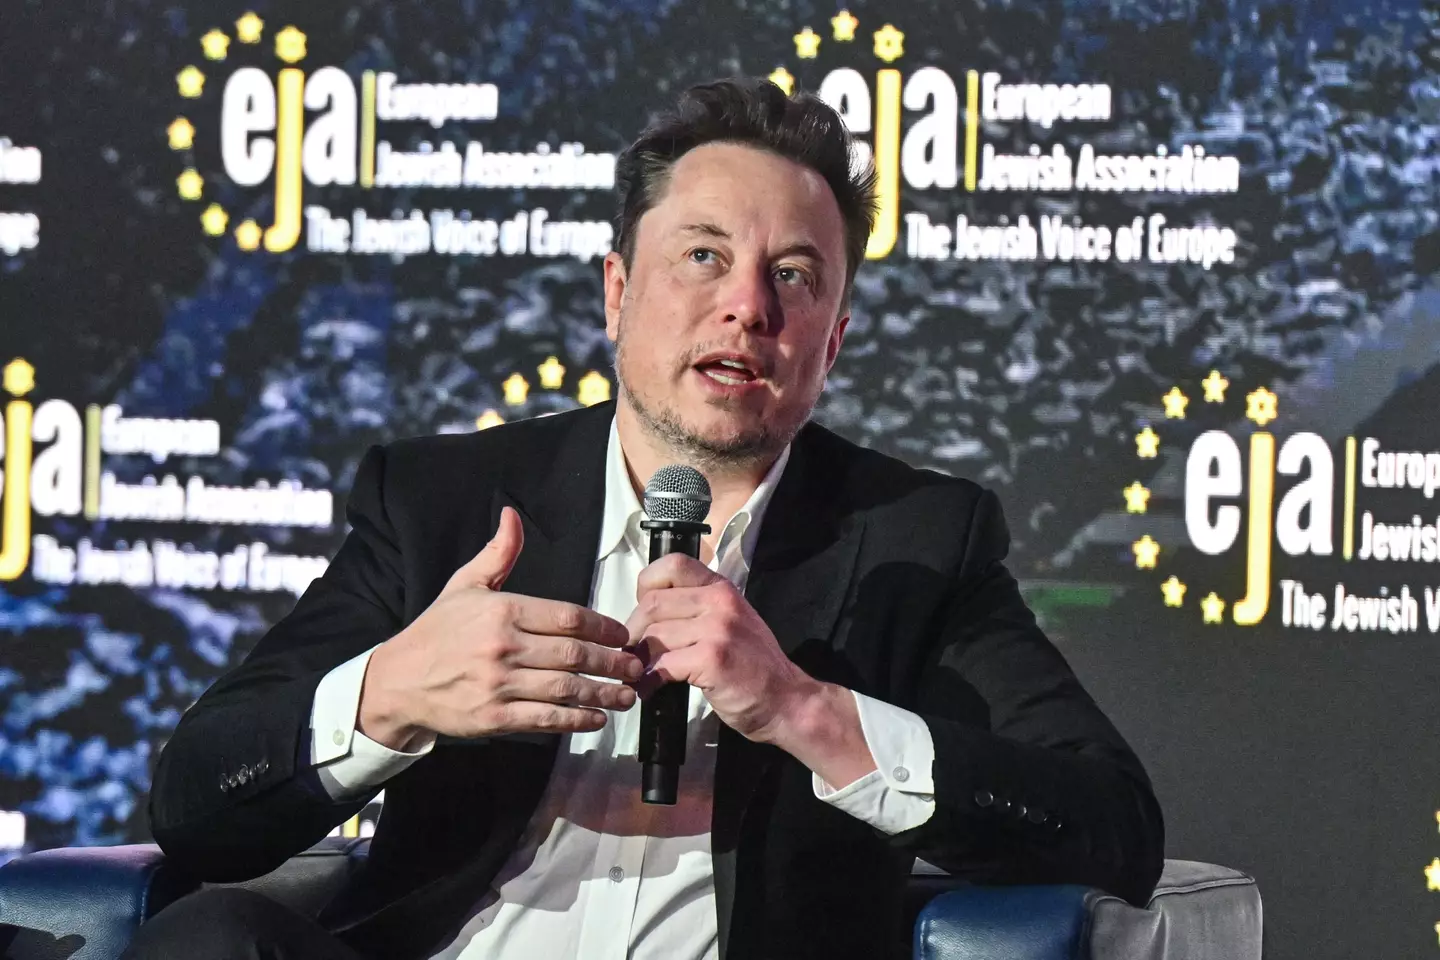 Musk tends to have a habit of occasionally over promising on some of his products.